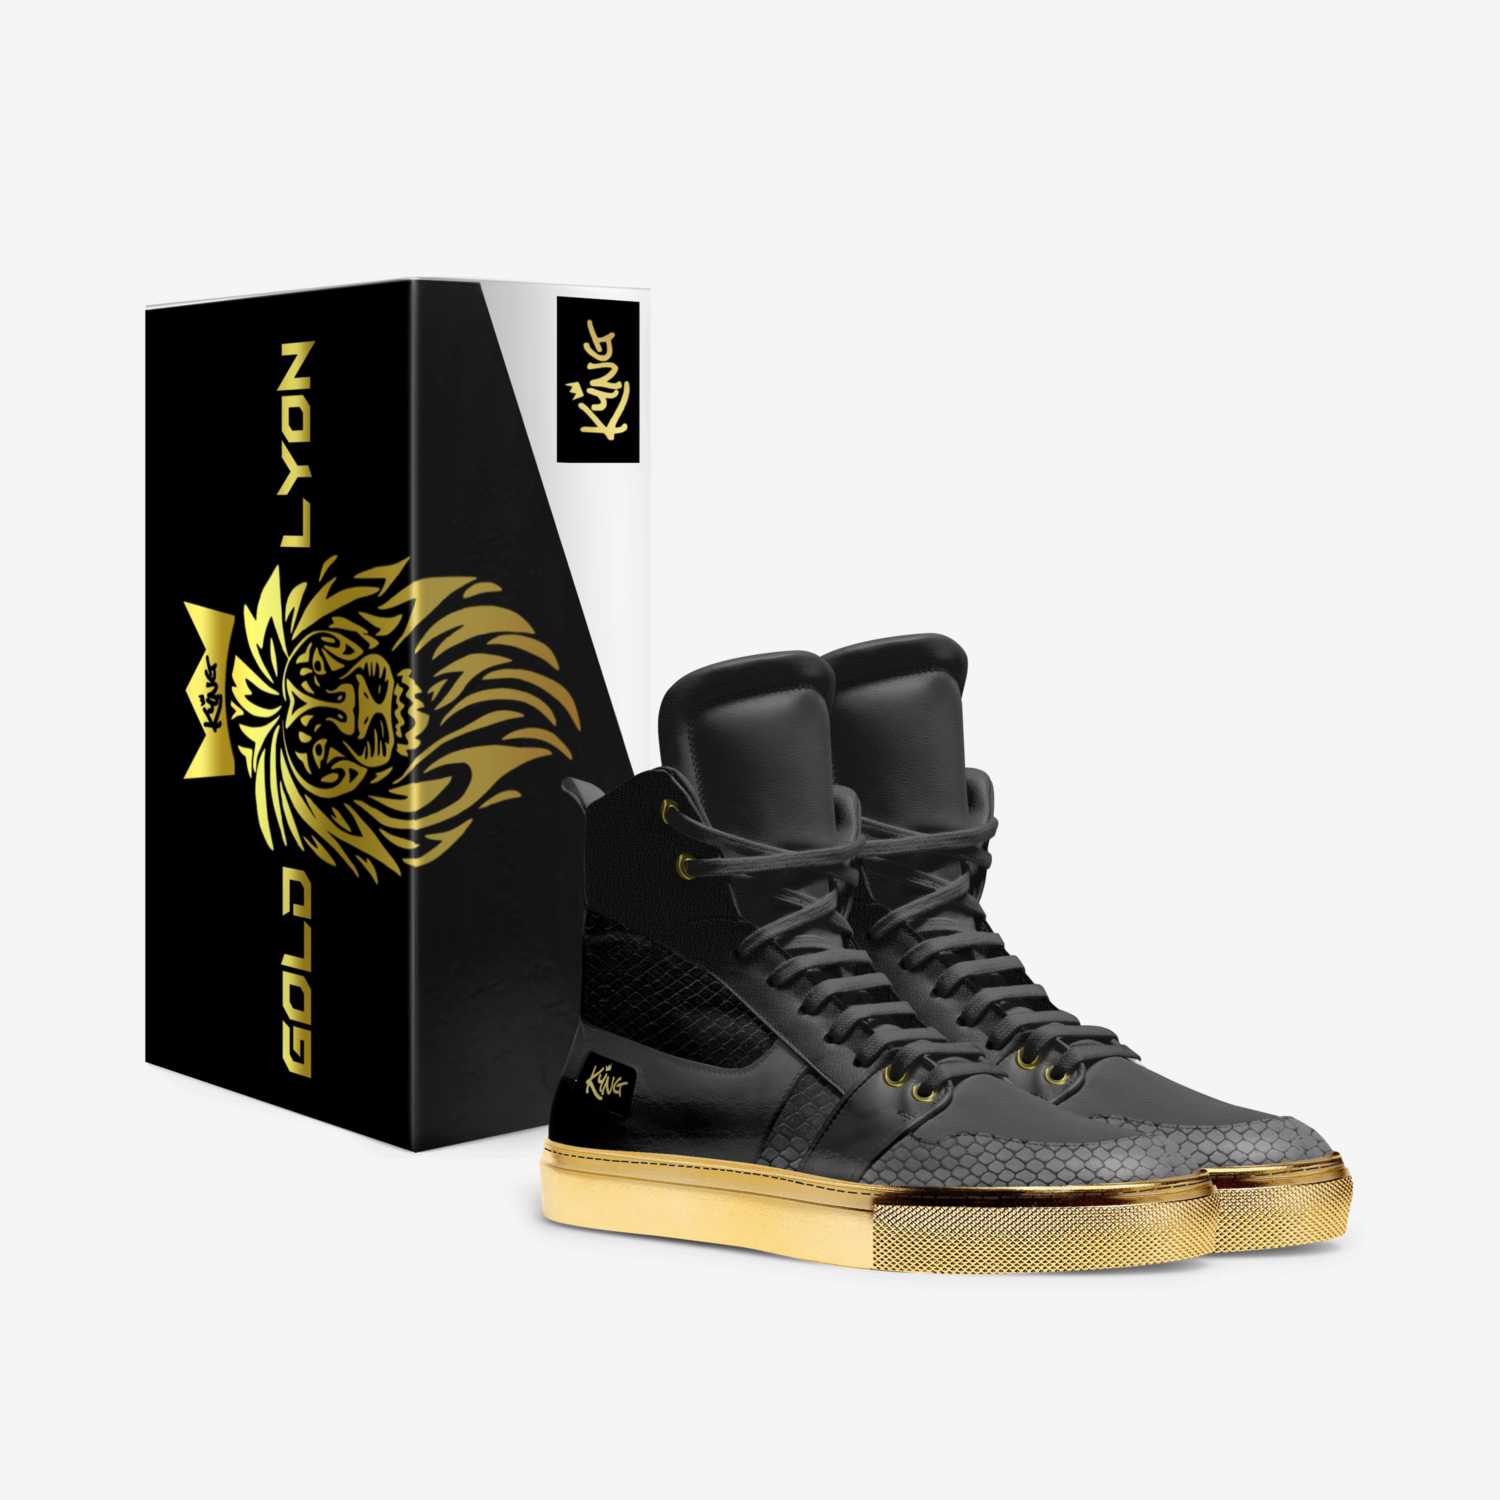 GOLD LYON custom made in Italy shoes by Kyng Brand Co. | Box view